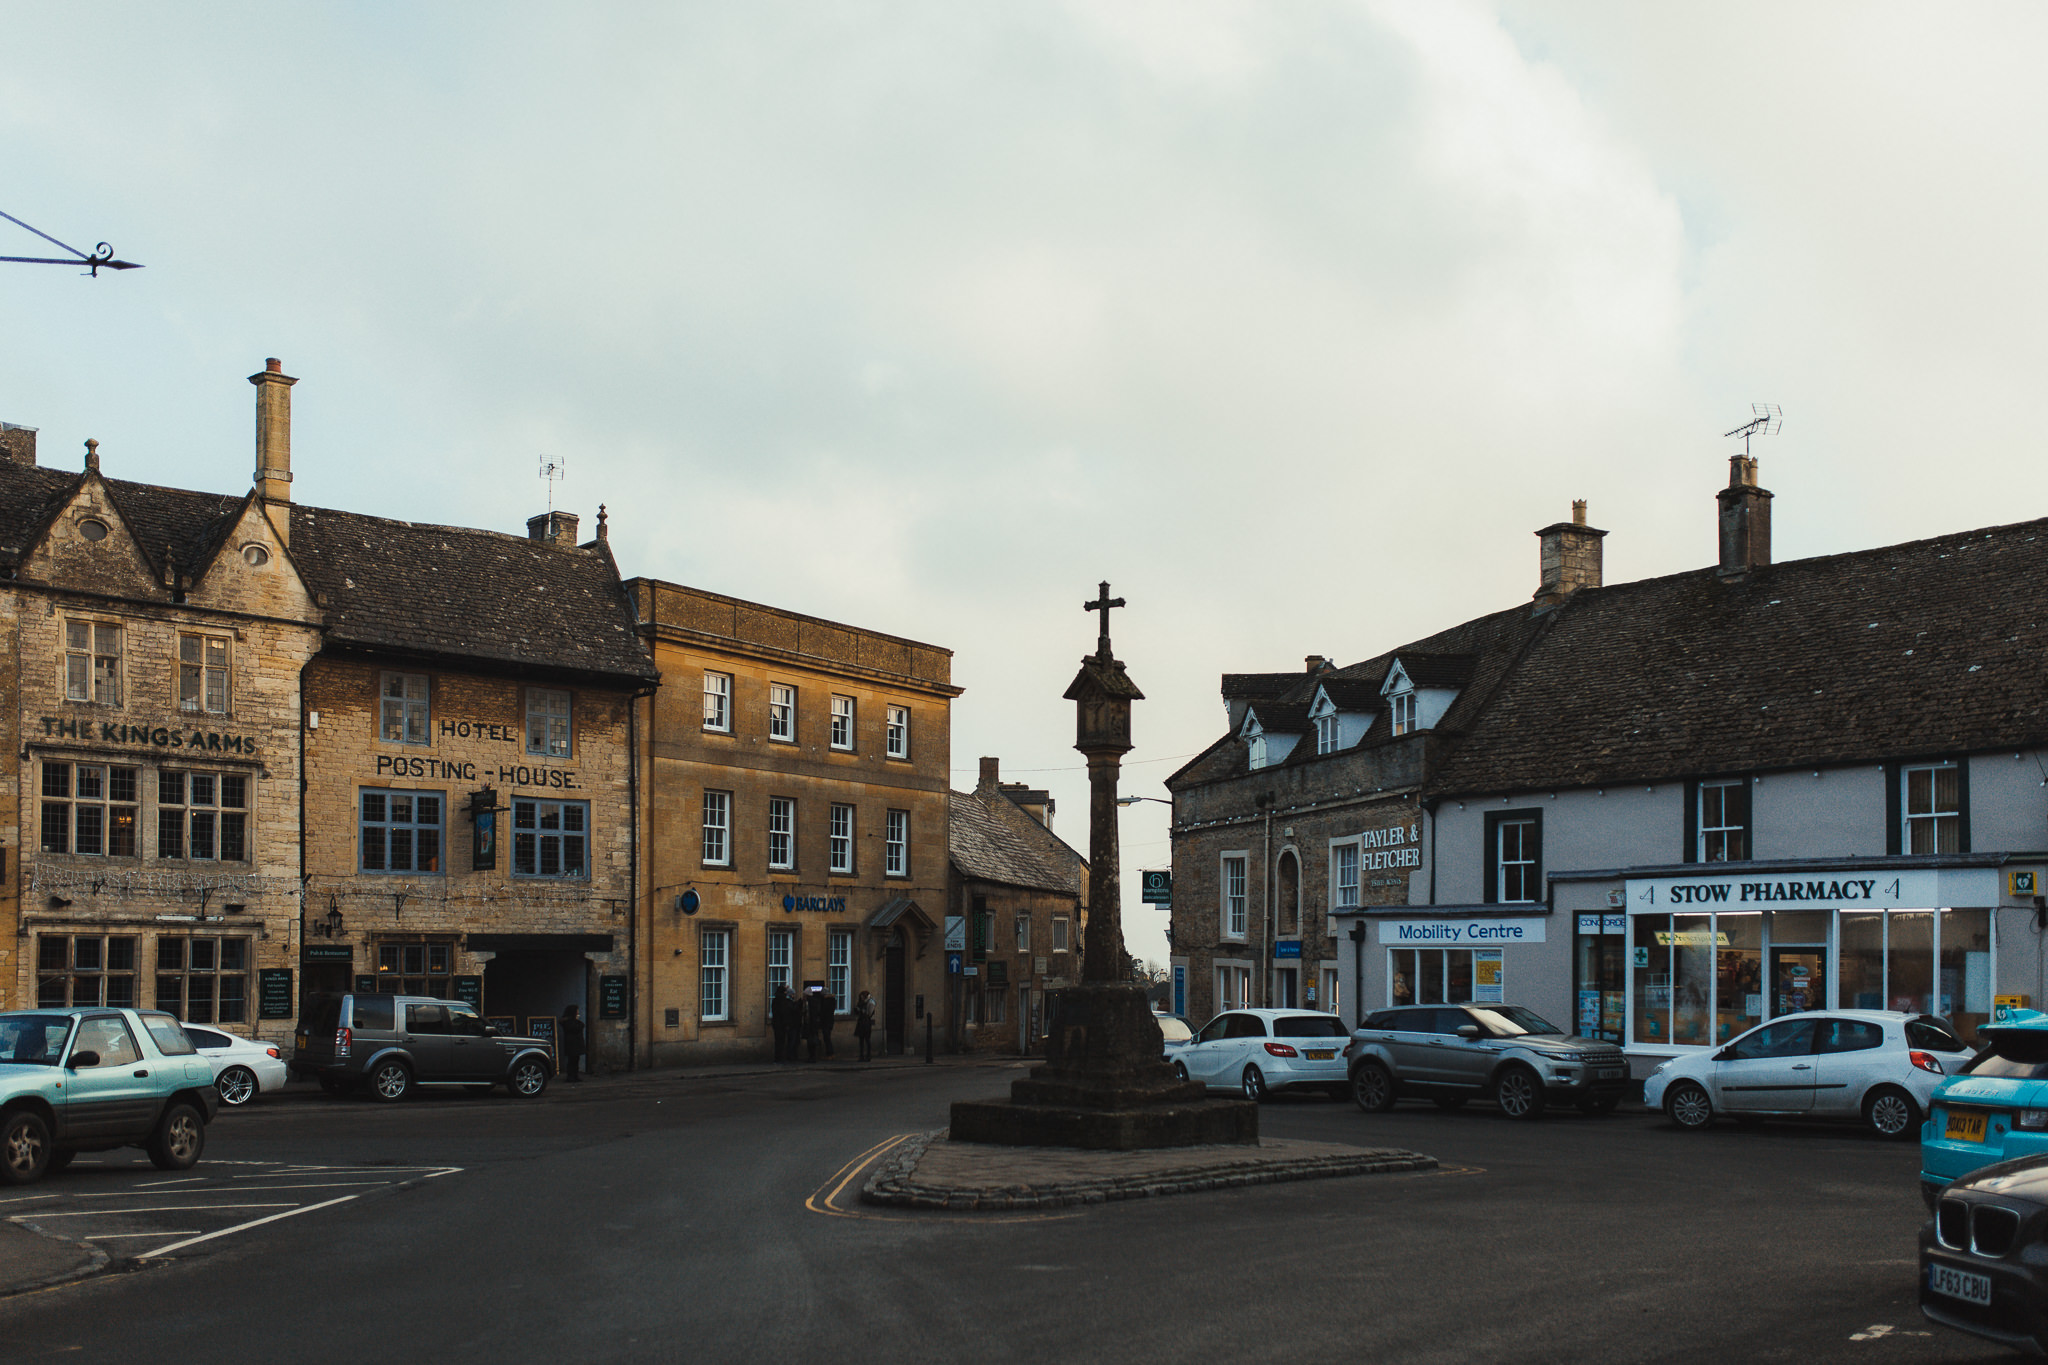   Stow-on-the-Wold. These places have funny names  